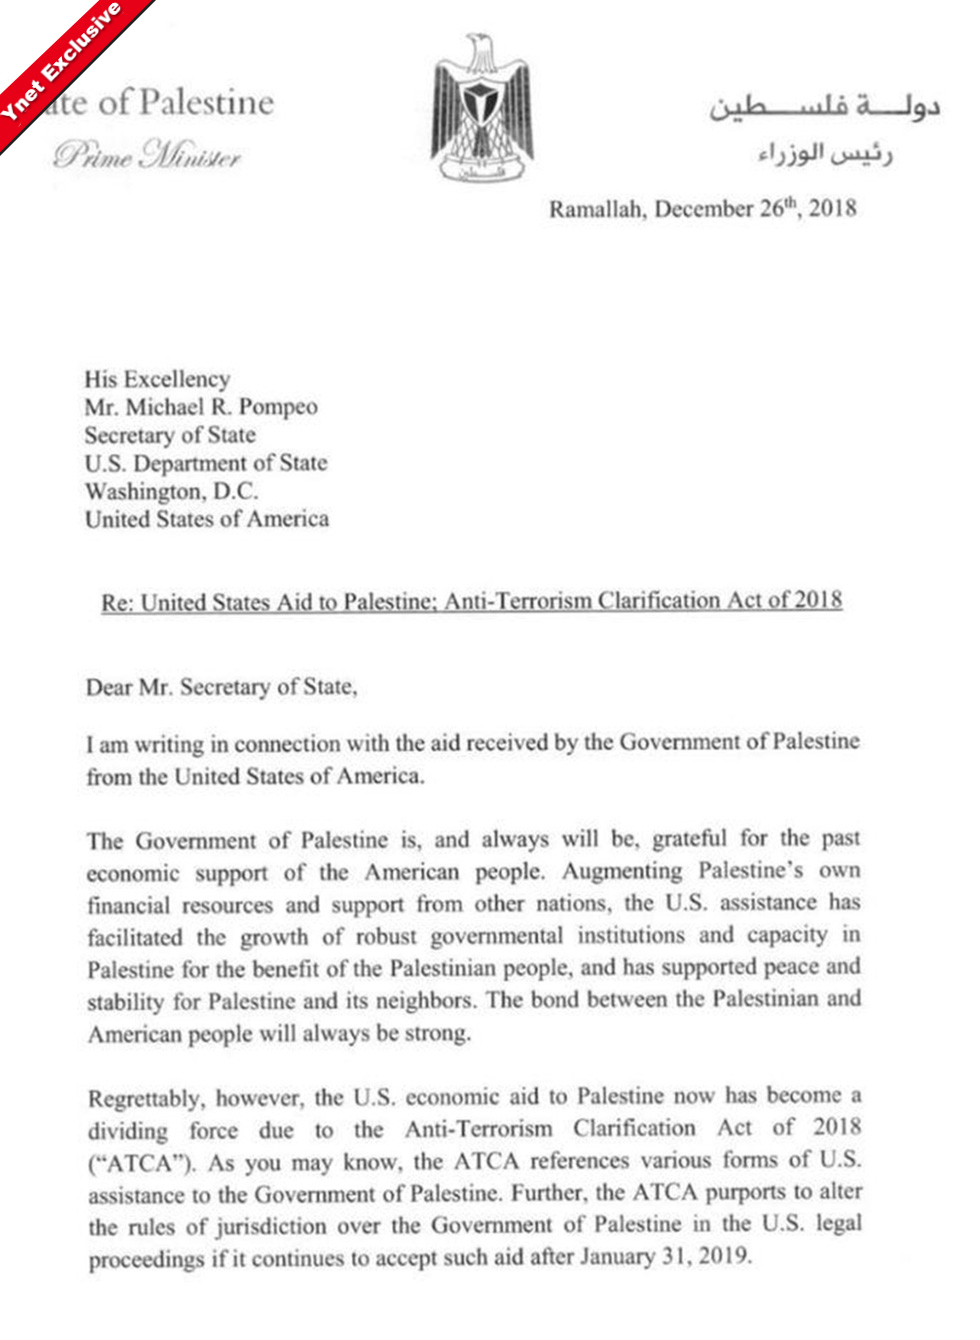 Abbas letter to Pompeo